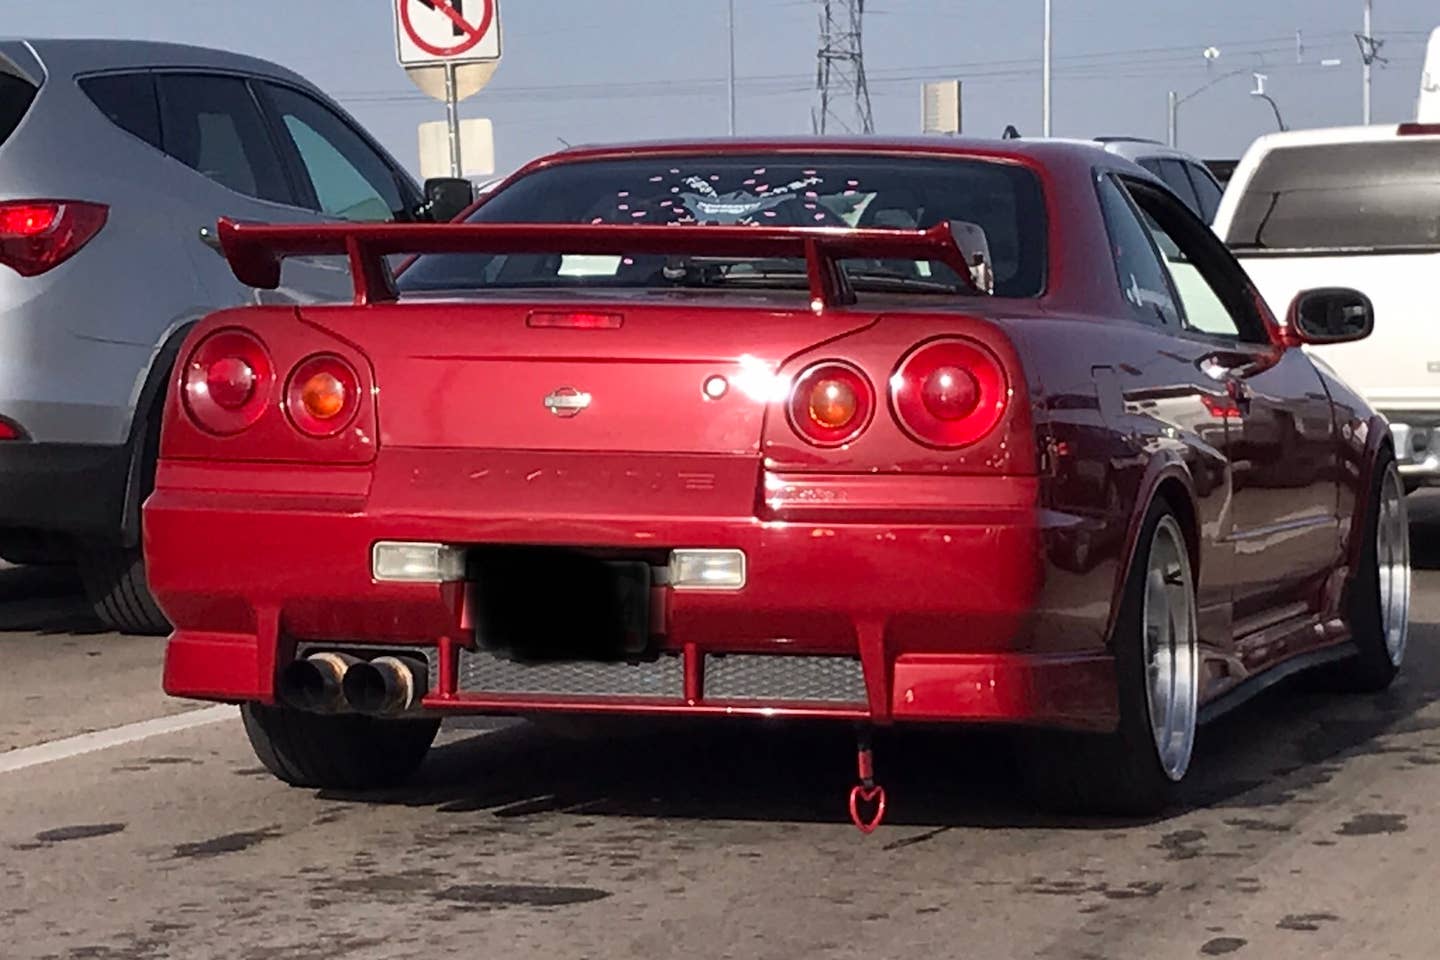 Nissan Skyline GTS-T (R34) photographed in the United States